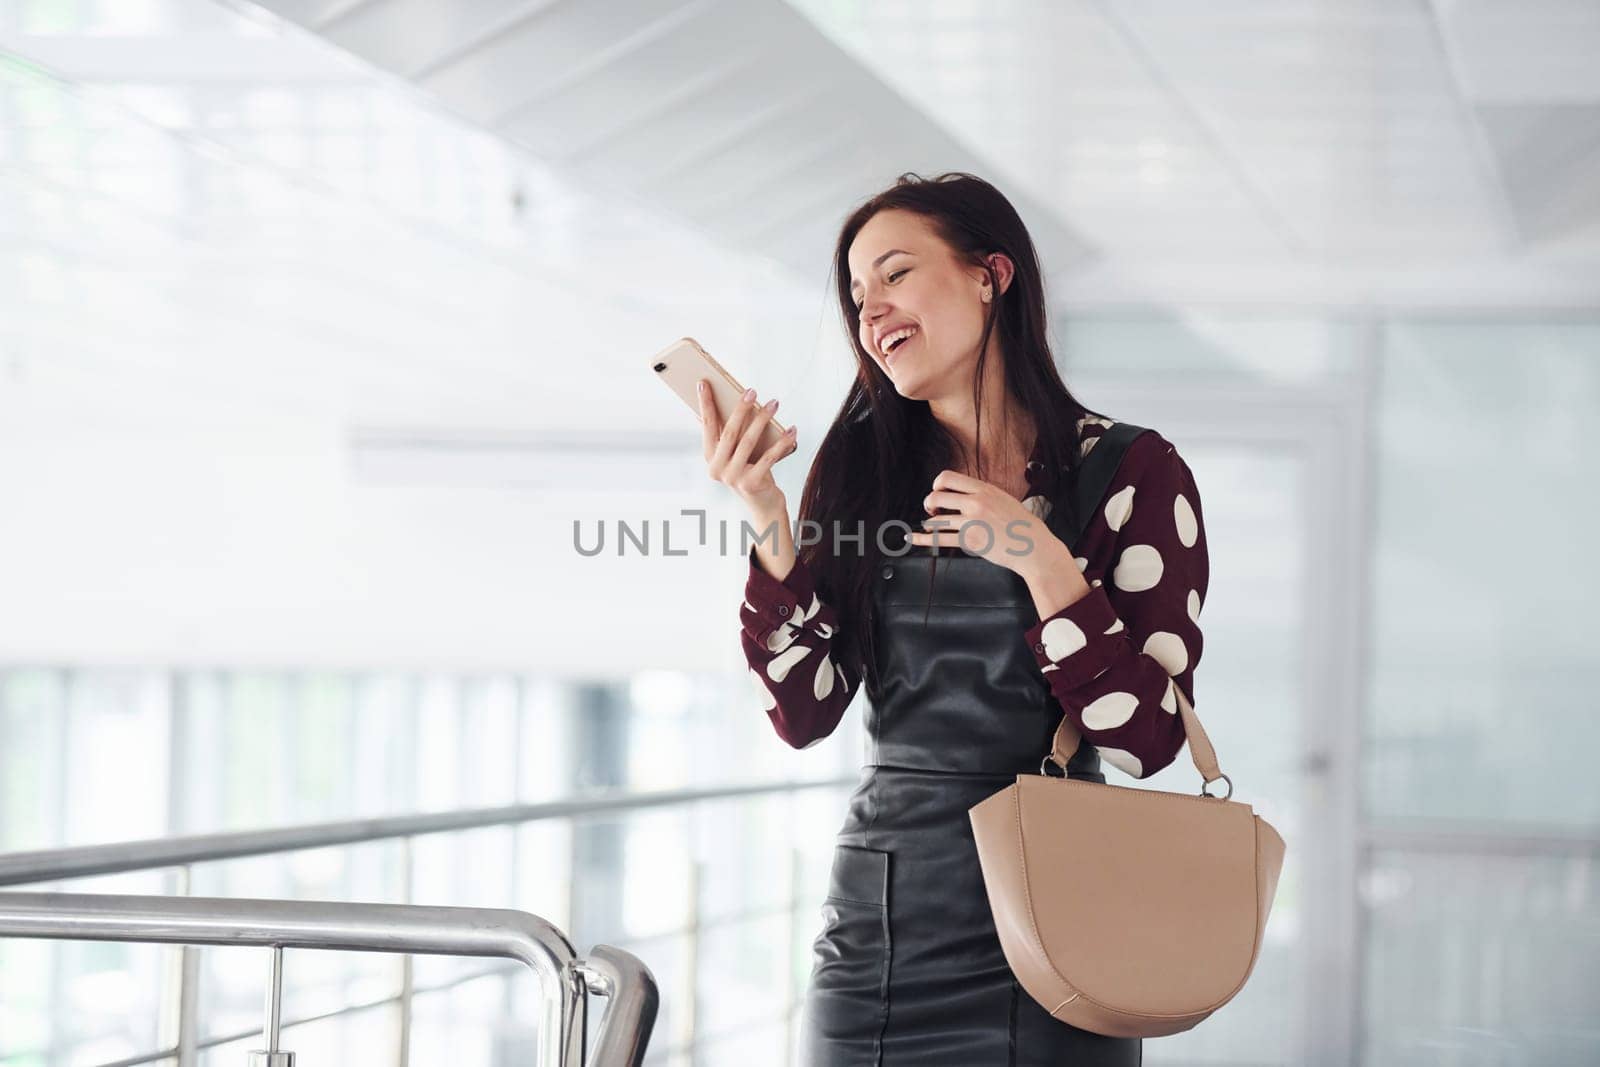 Holding phone. Beautiful young brunette in black skirt indoors in office or airport. Having free time by Standret